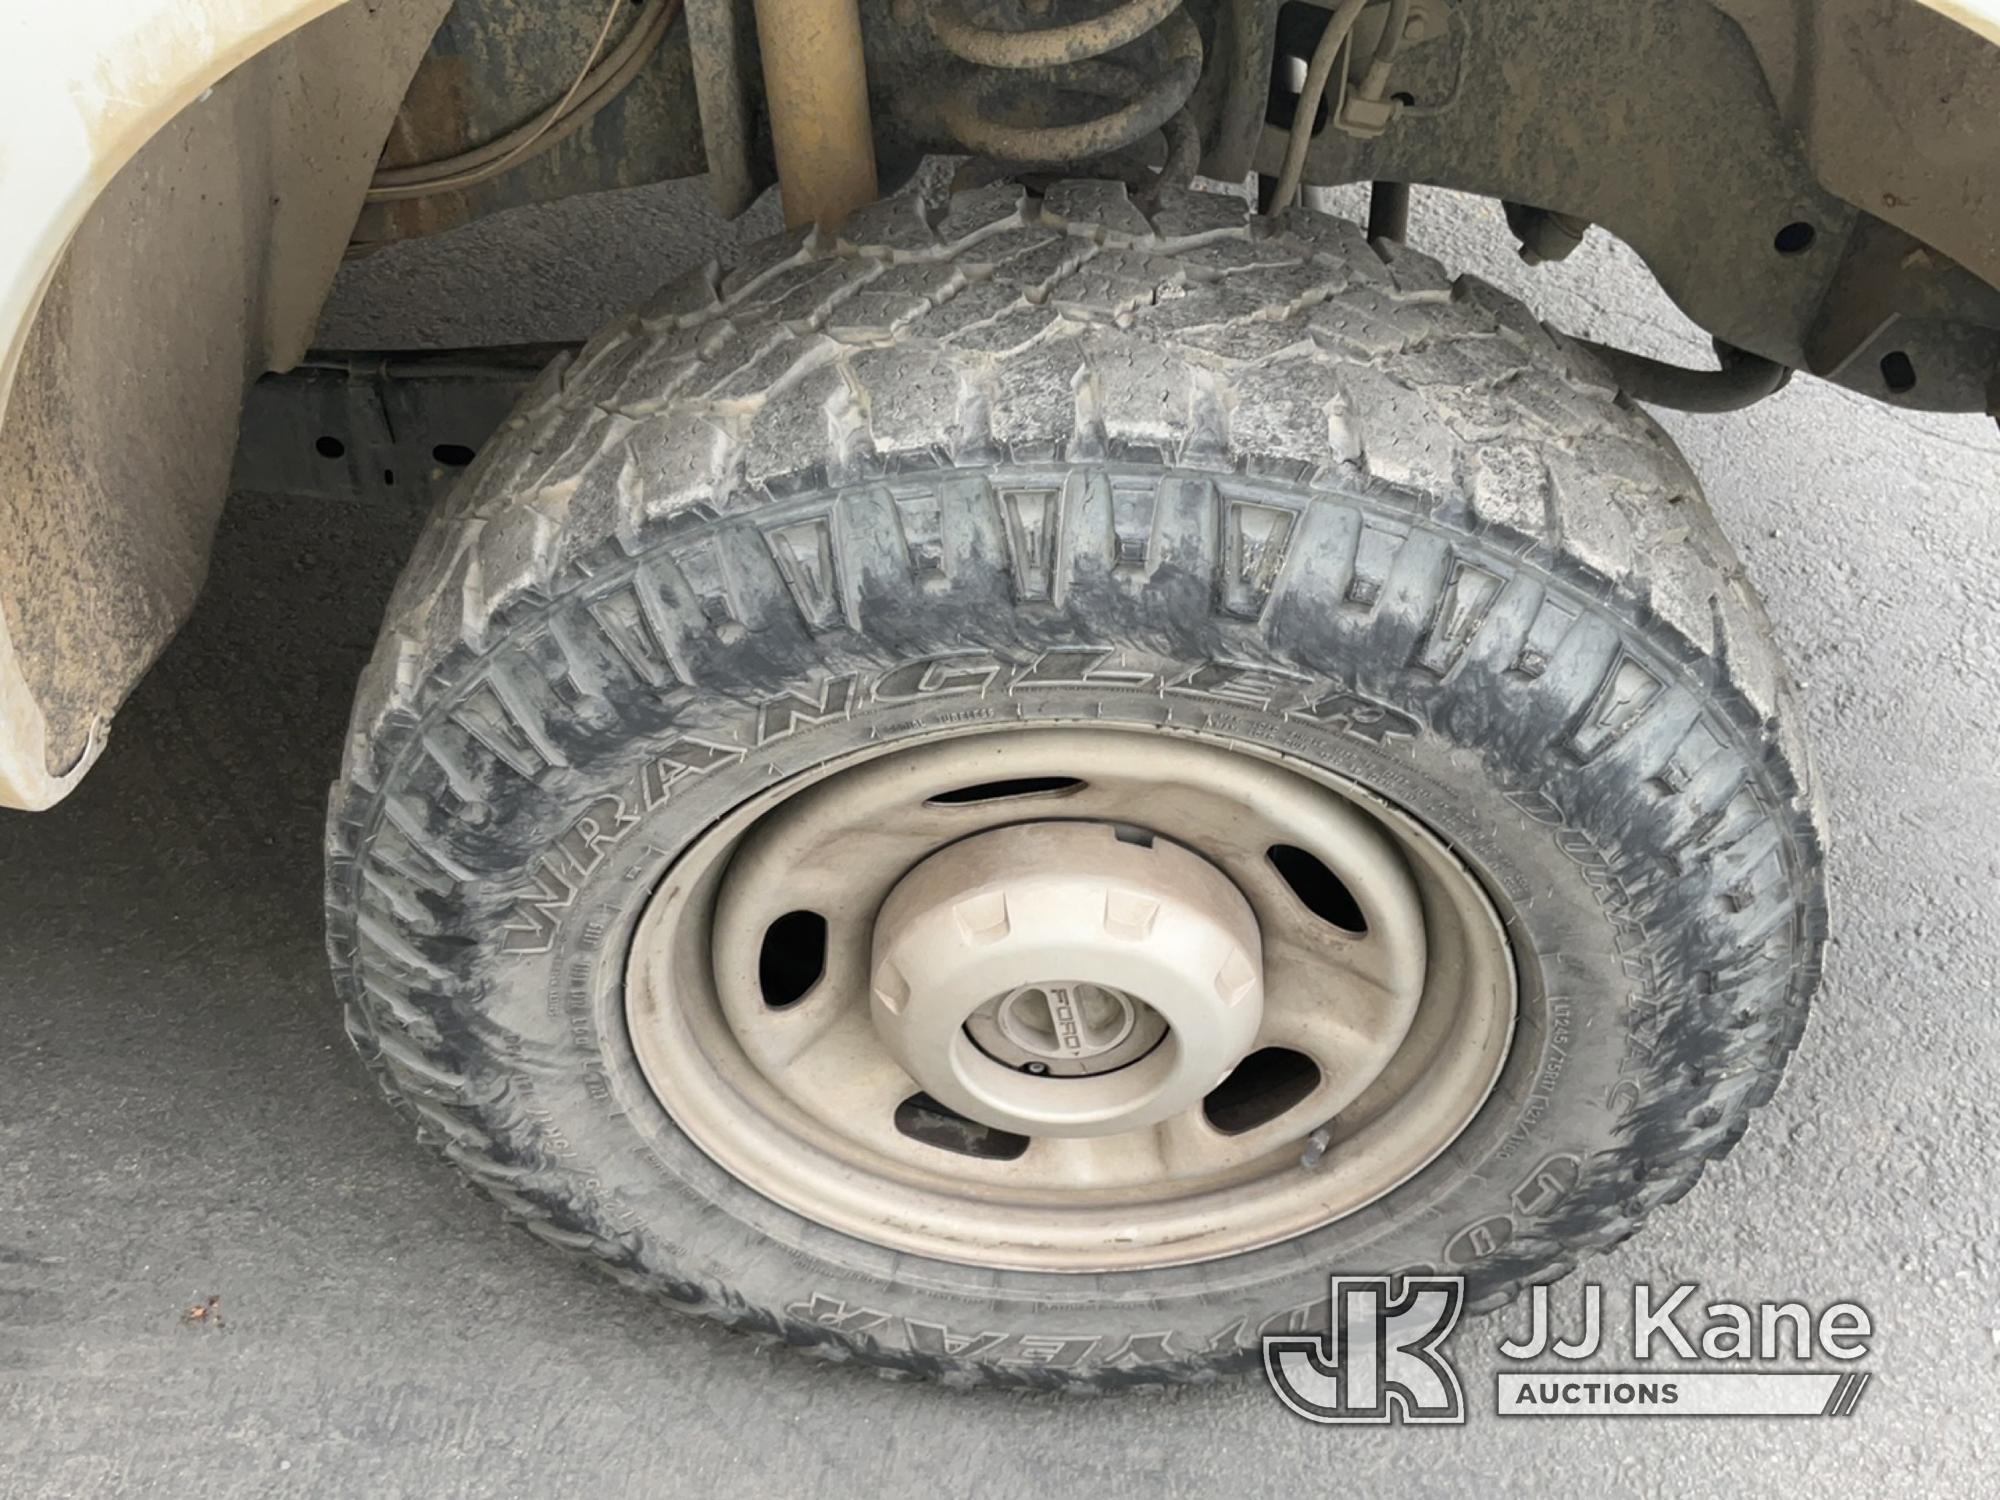 (Jurupa Valley, CA) 2013 Ford F250 4x4 Extended-Cab Service Truck Runs & Moves, Airbag Light On, Int